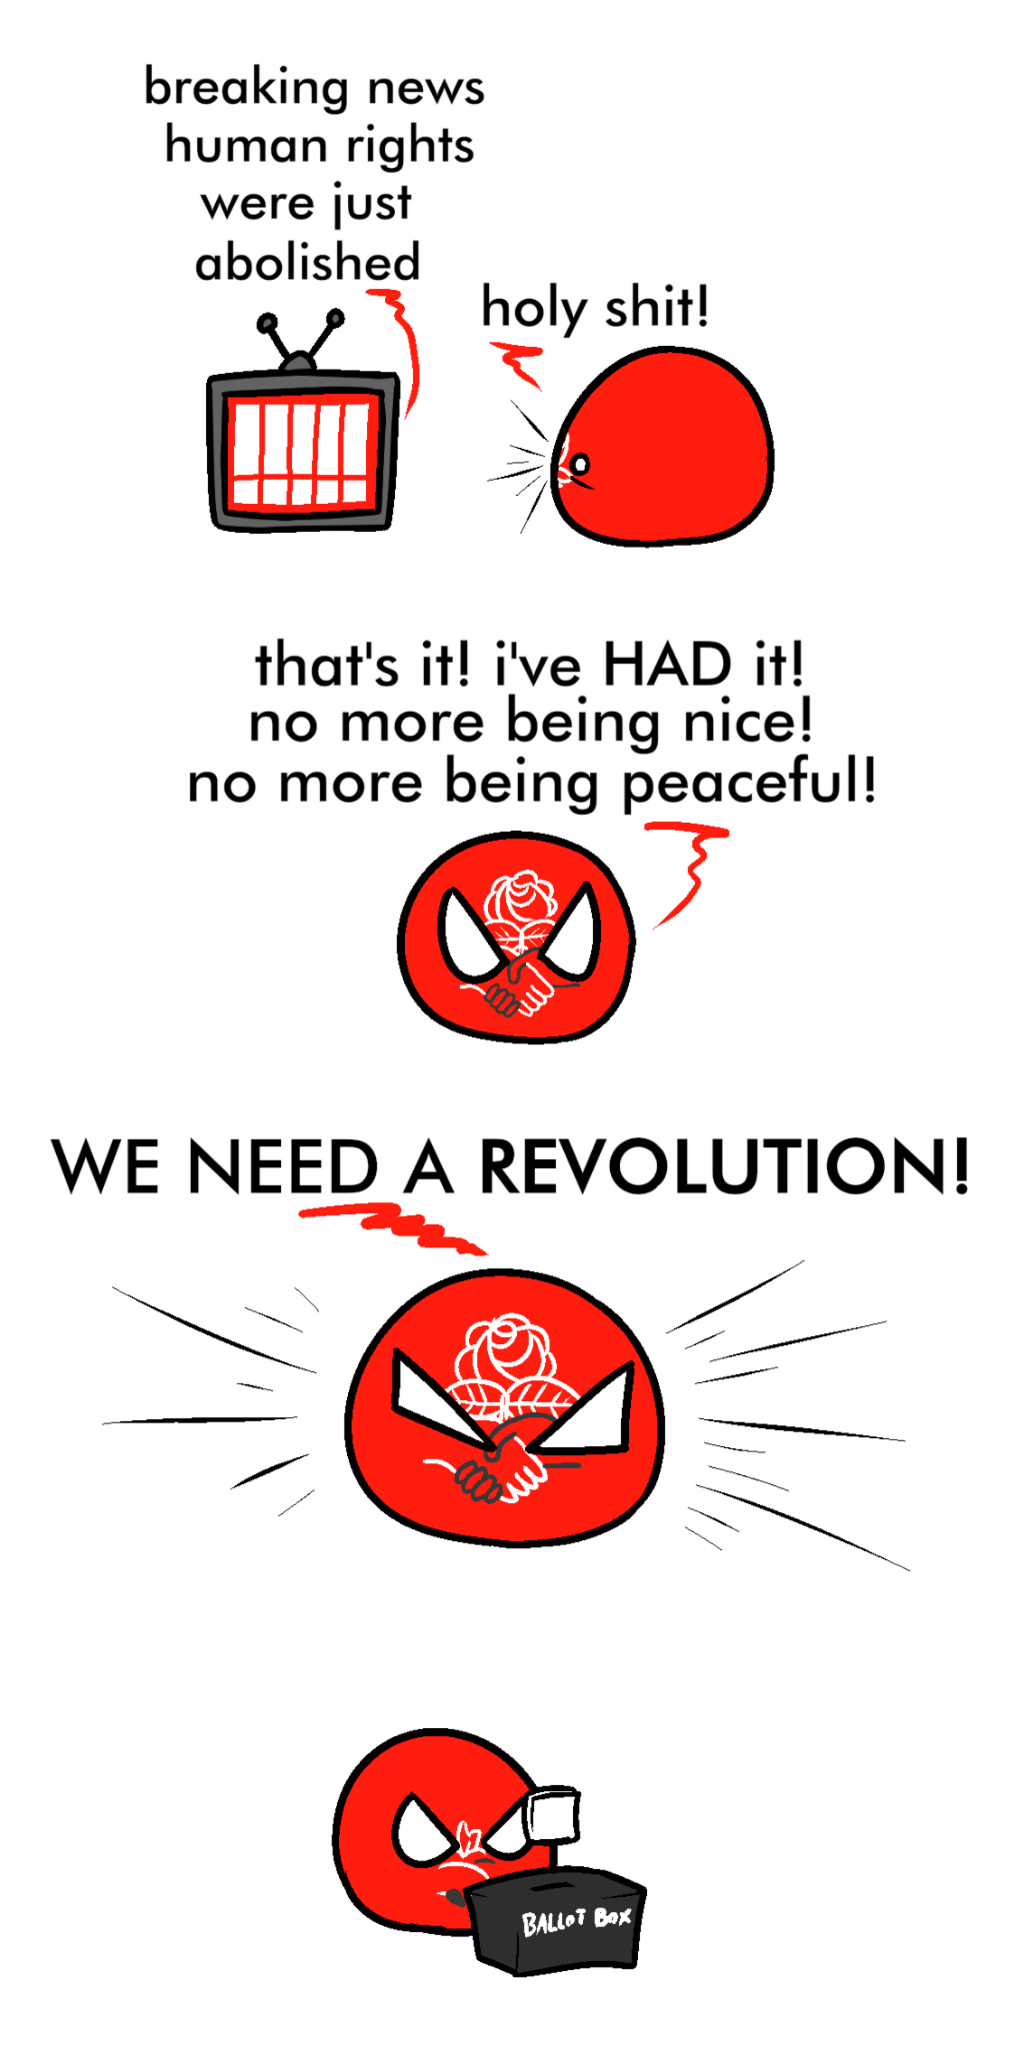 4 panel meme, stacked. 
Top panel shows DSA ball watching TV. TV says, "Breaking news, human rights were just abolished". DSA ball says, "Holy shit!".
2nd panel shows DSA ball saying, "That's it, I've HAD it! No more being nice, no more being peaceful!"
3rd panel shows DSA ball saying, "WE NEED A REVOLUTION!"
Last panel shows DSA ball at the ballot box casting their vote.